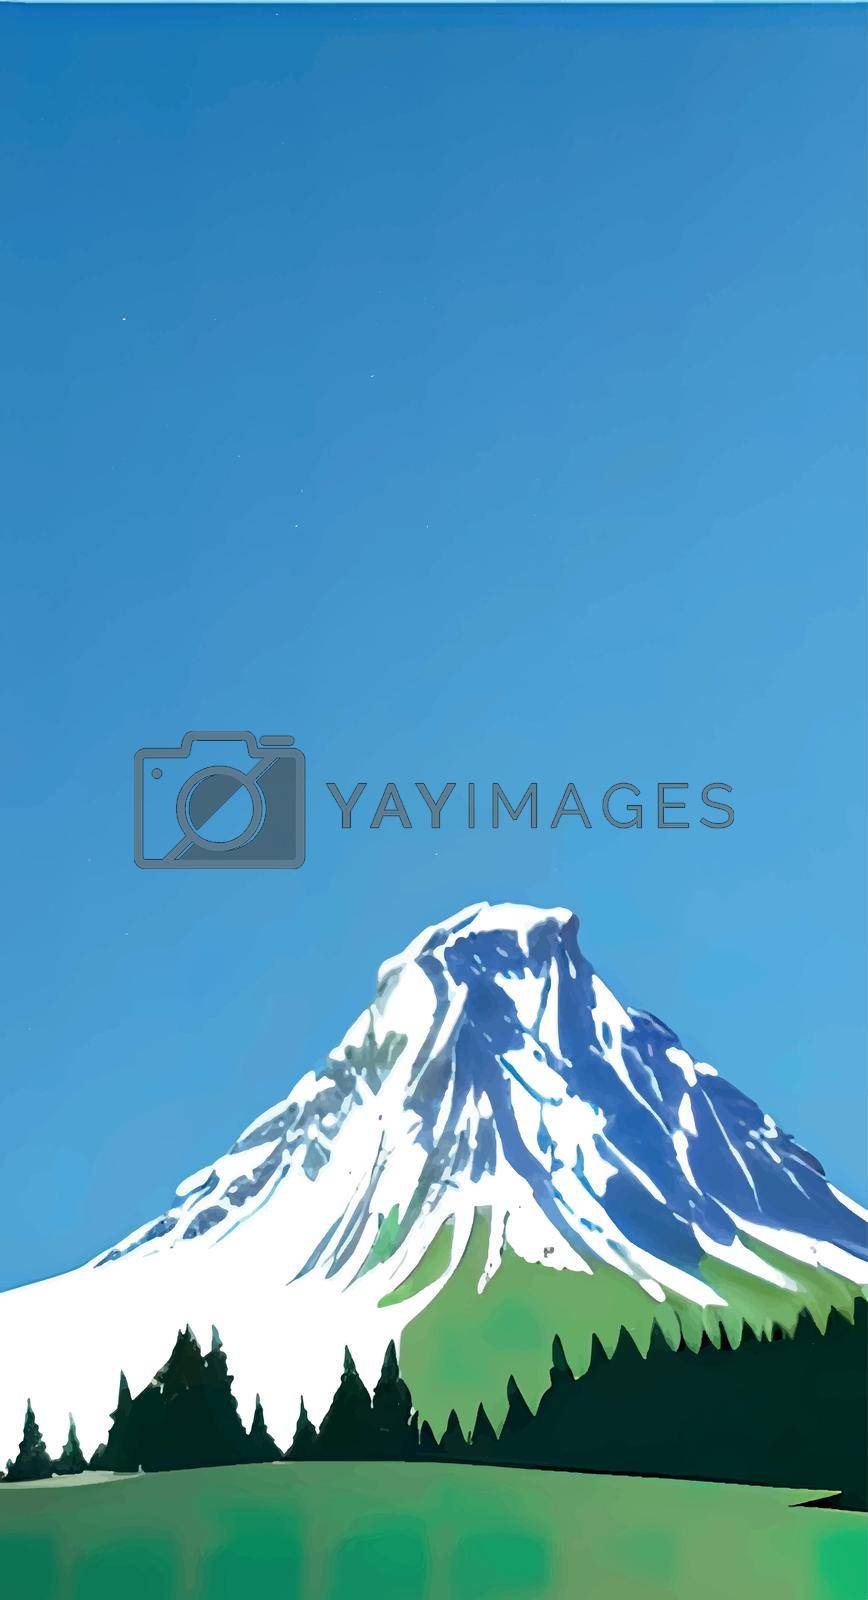 Royalty free image of summit and mountain landscape with snow by yilmazsavaskandag